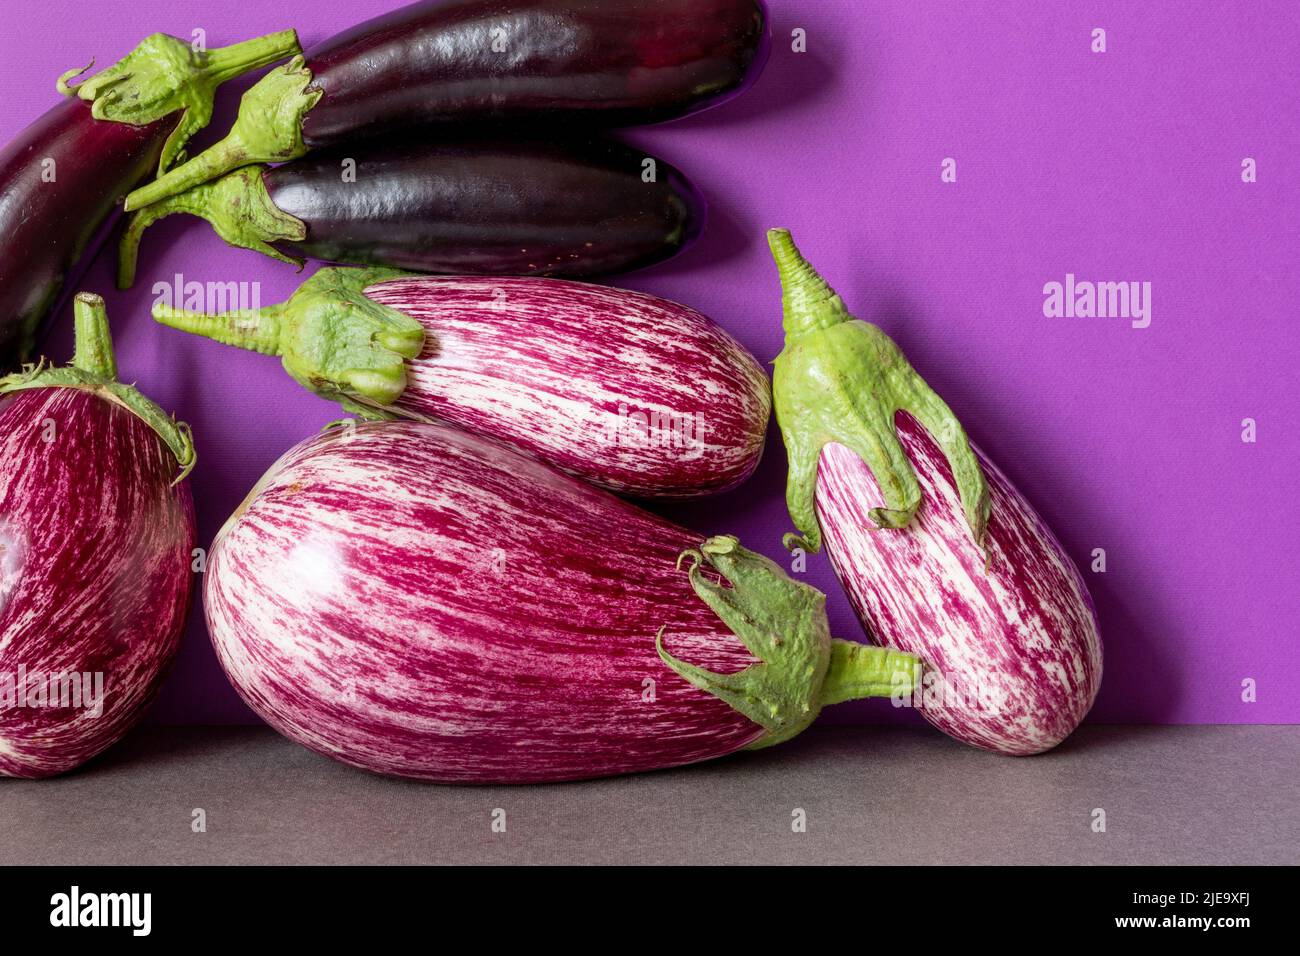 Three ripe eggplants with beautiful purple and pink striped patterns. Natural organic farm vegetable food concept. Stock Photo